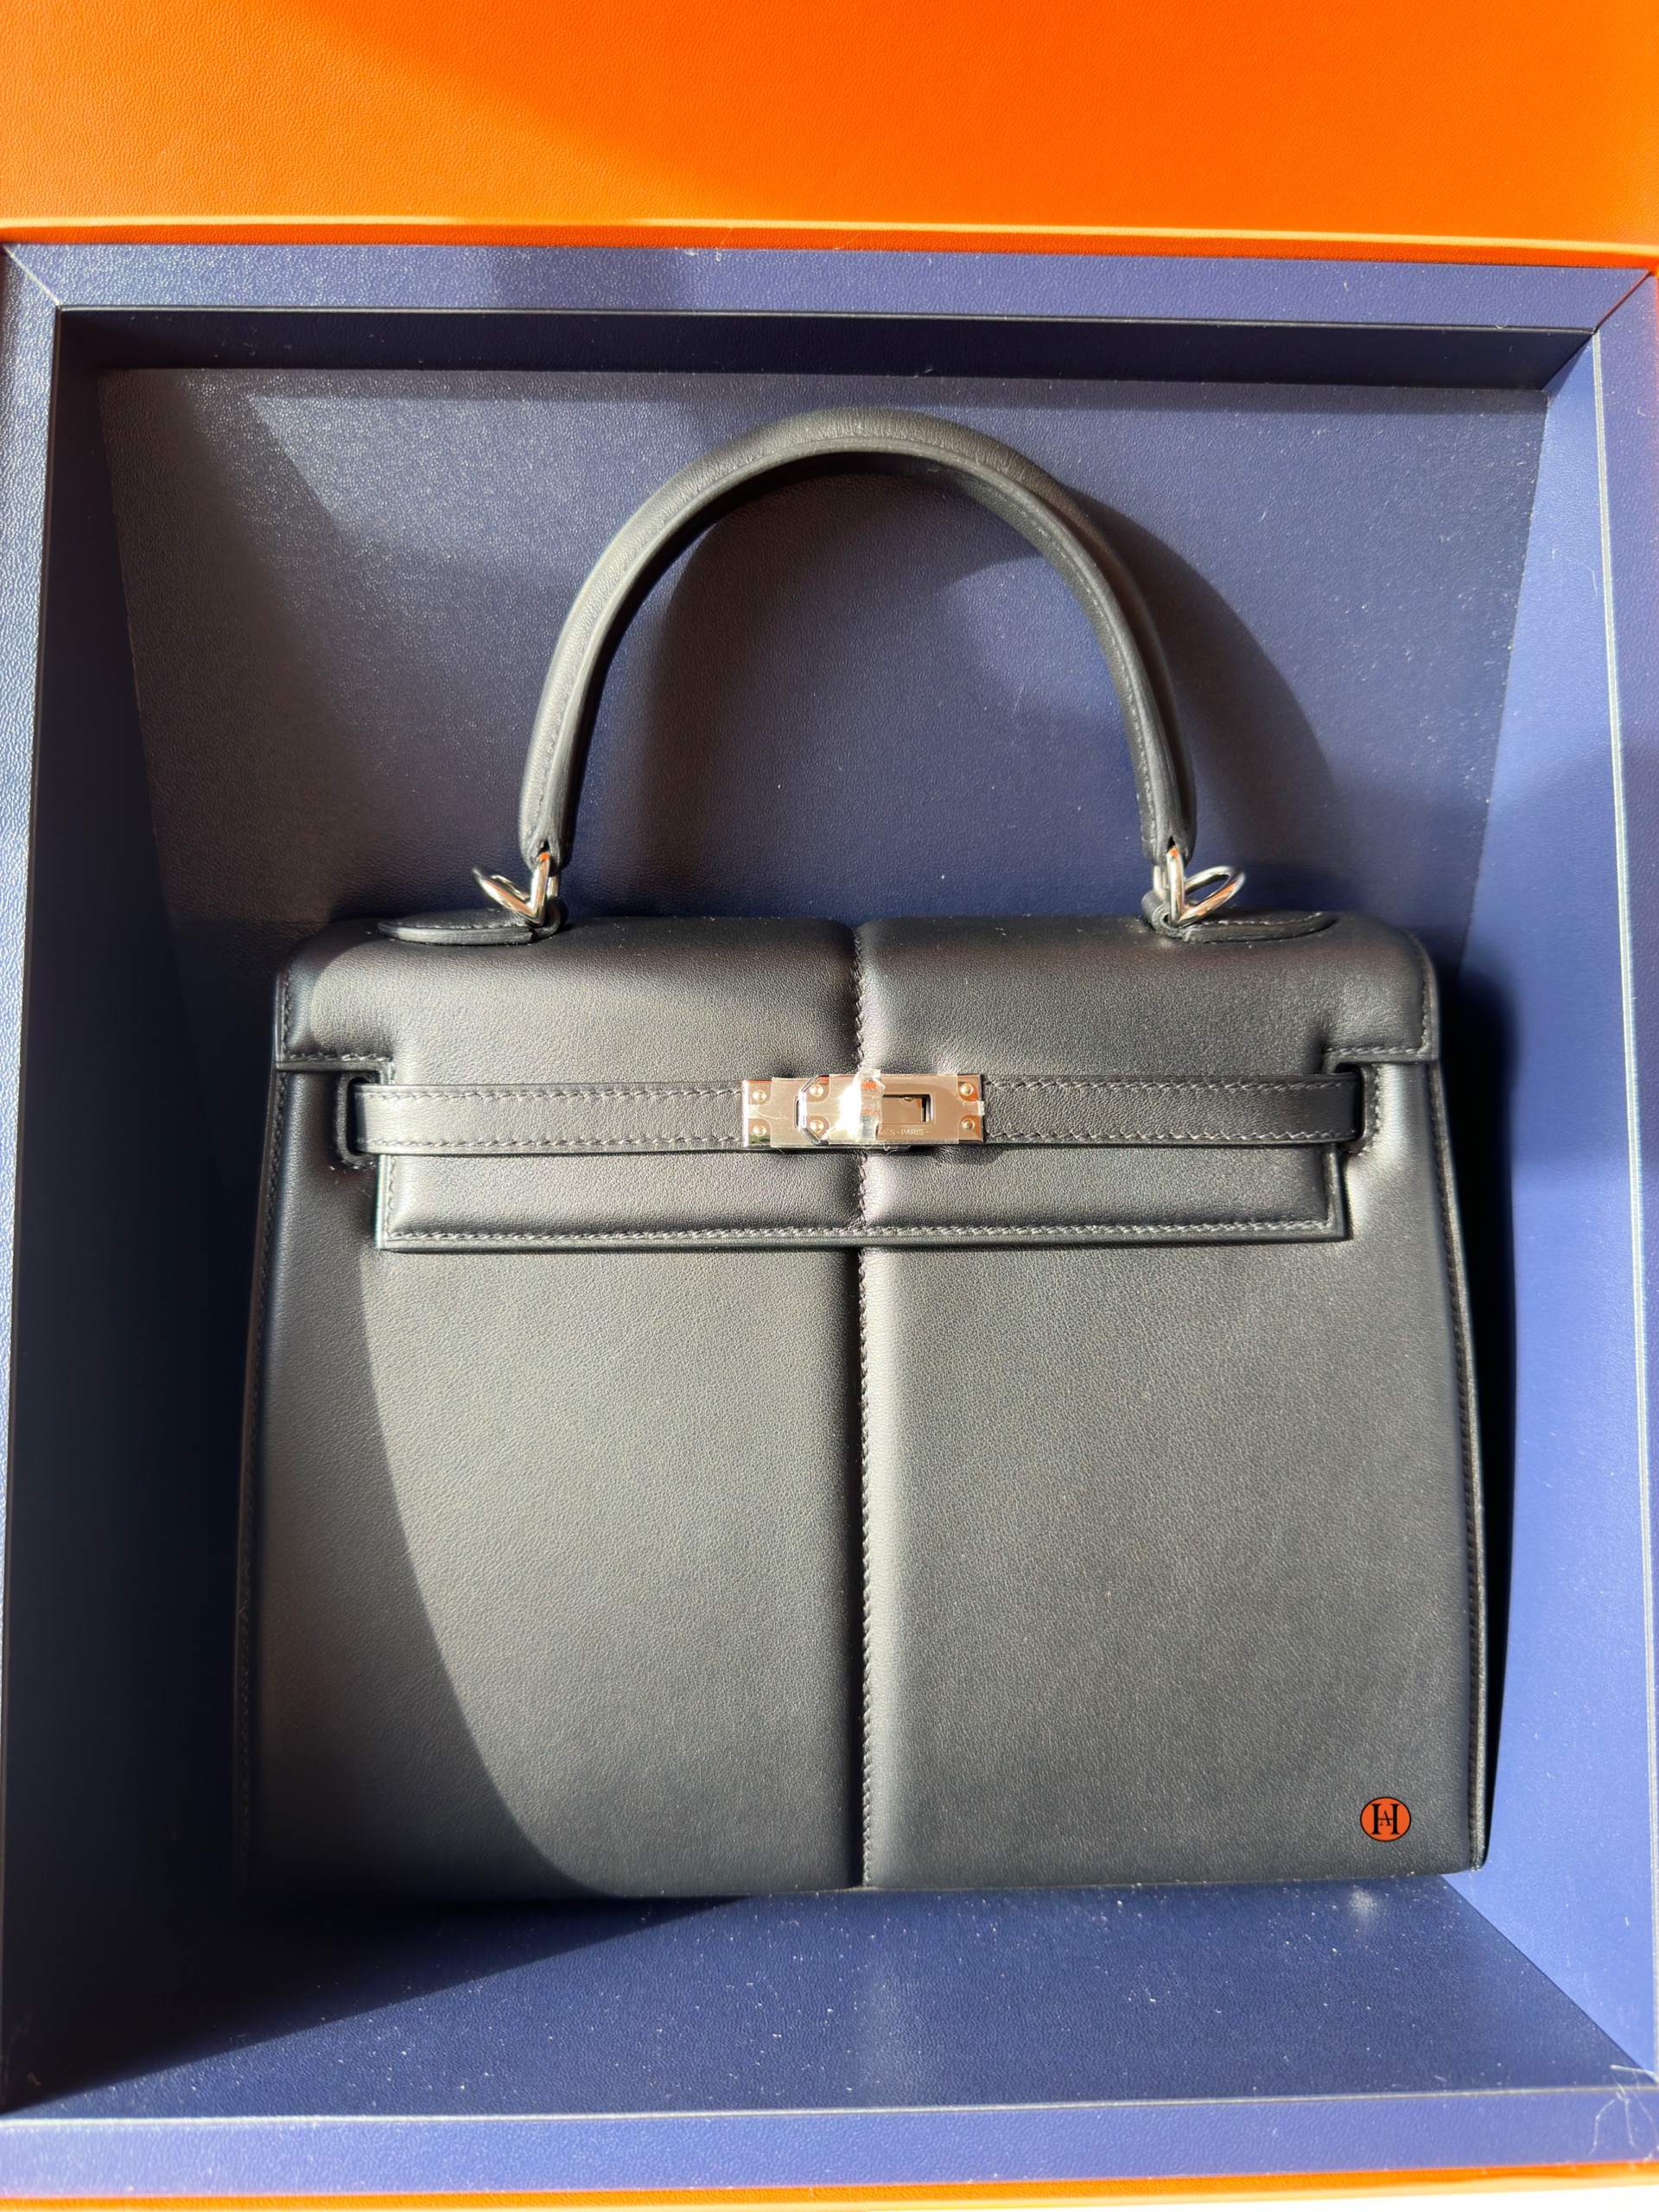 Vintage Lux - Just in!!!!! Brand new in box Kelly 25 retourne in